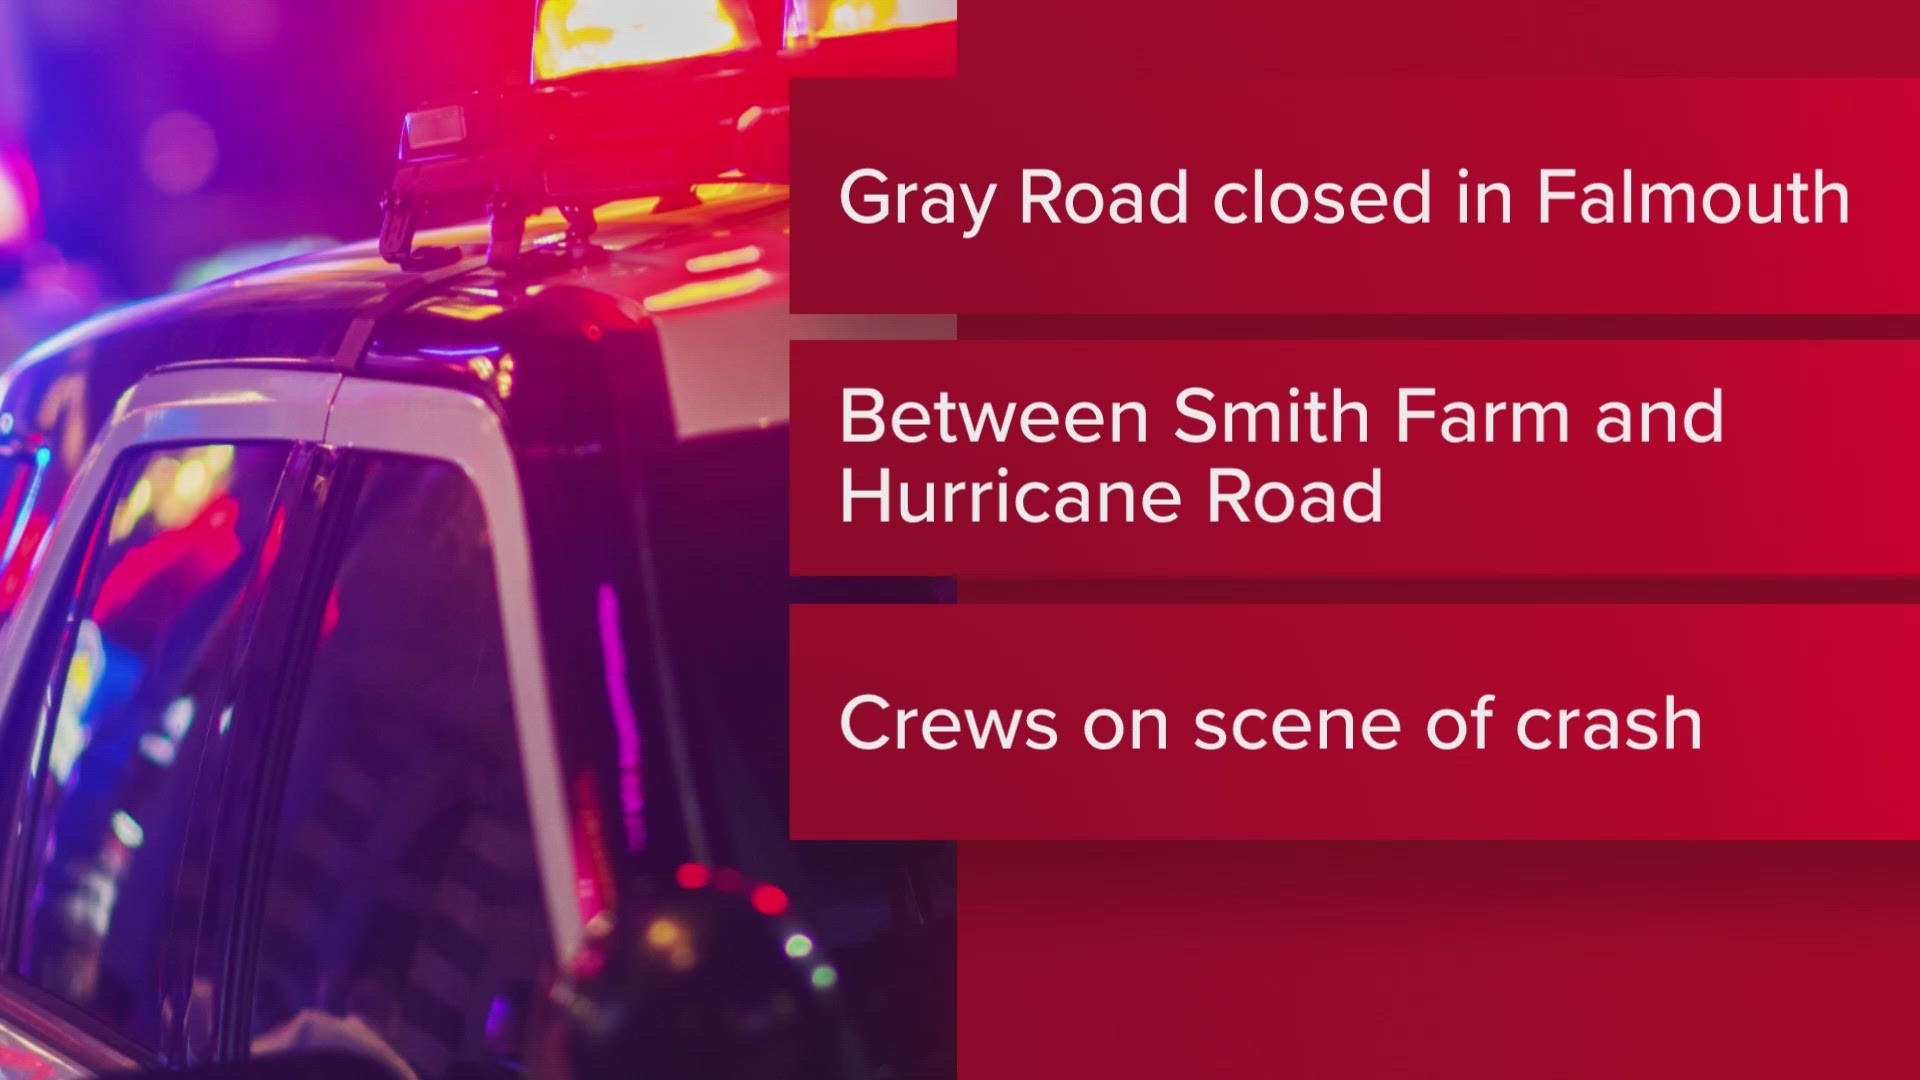 Police say the road is closed between Smith Farm and Hurricane Road.